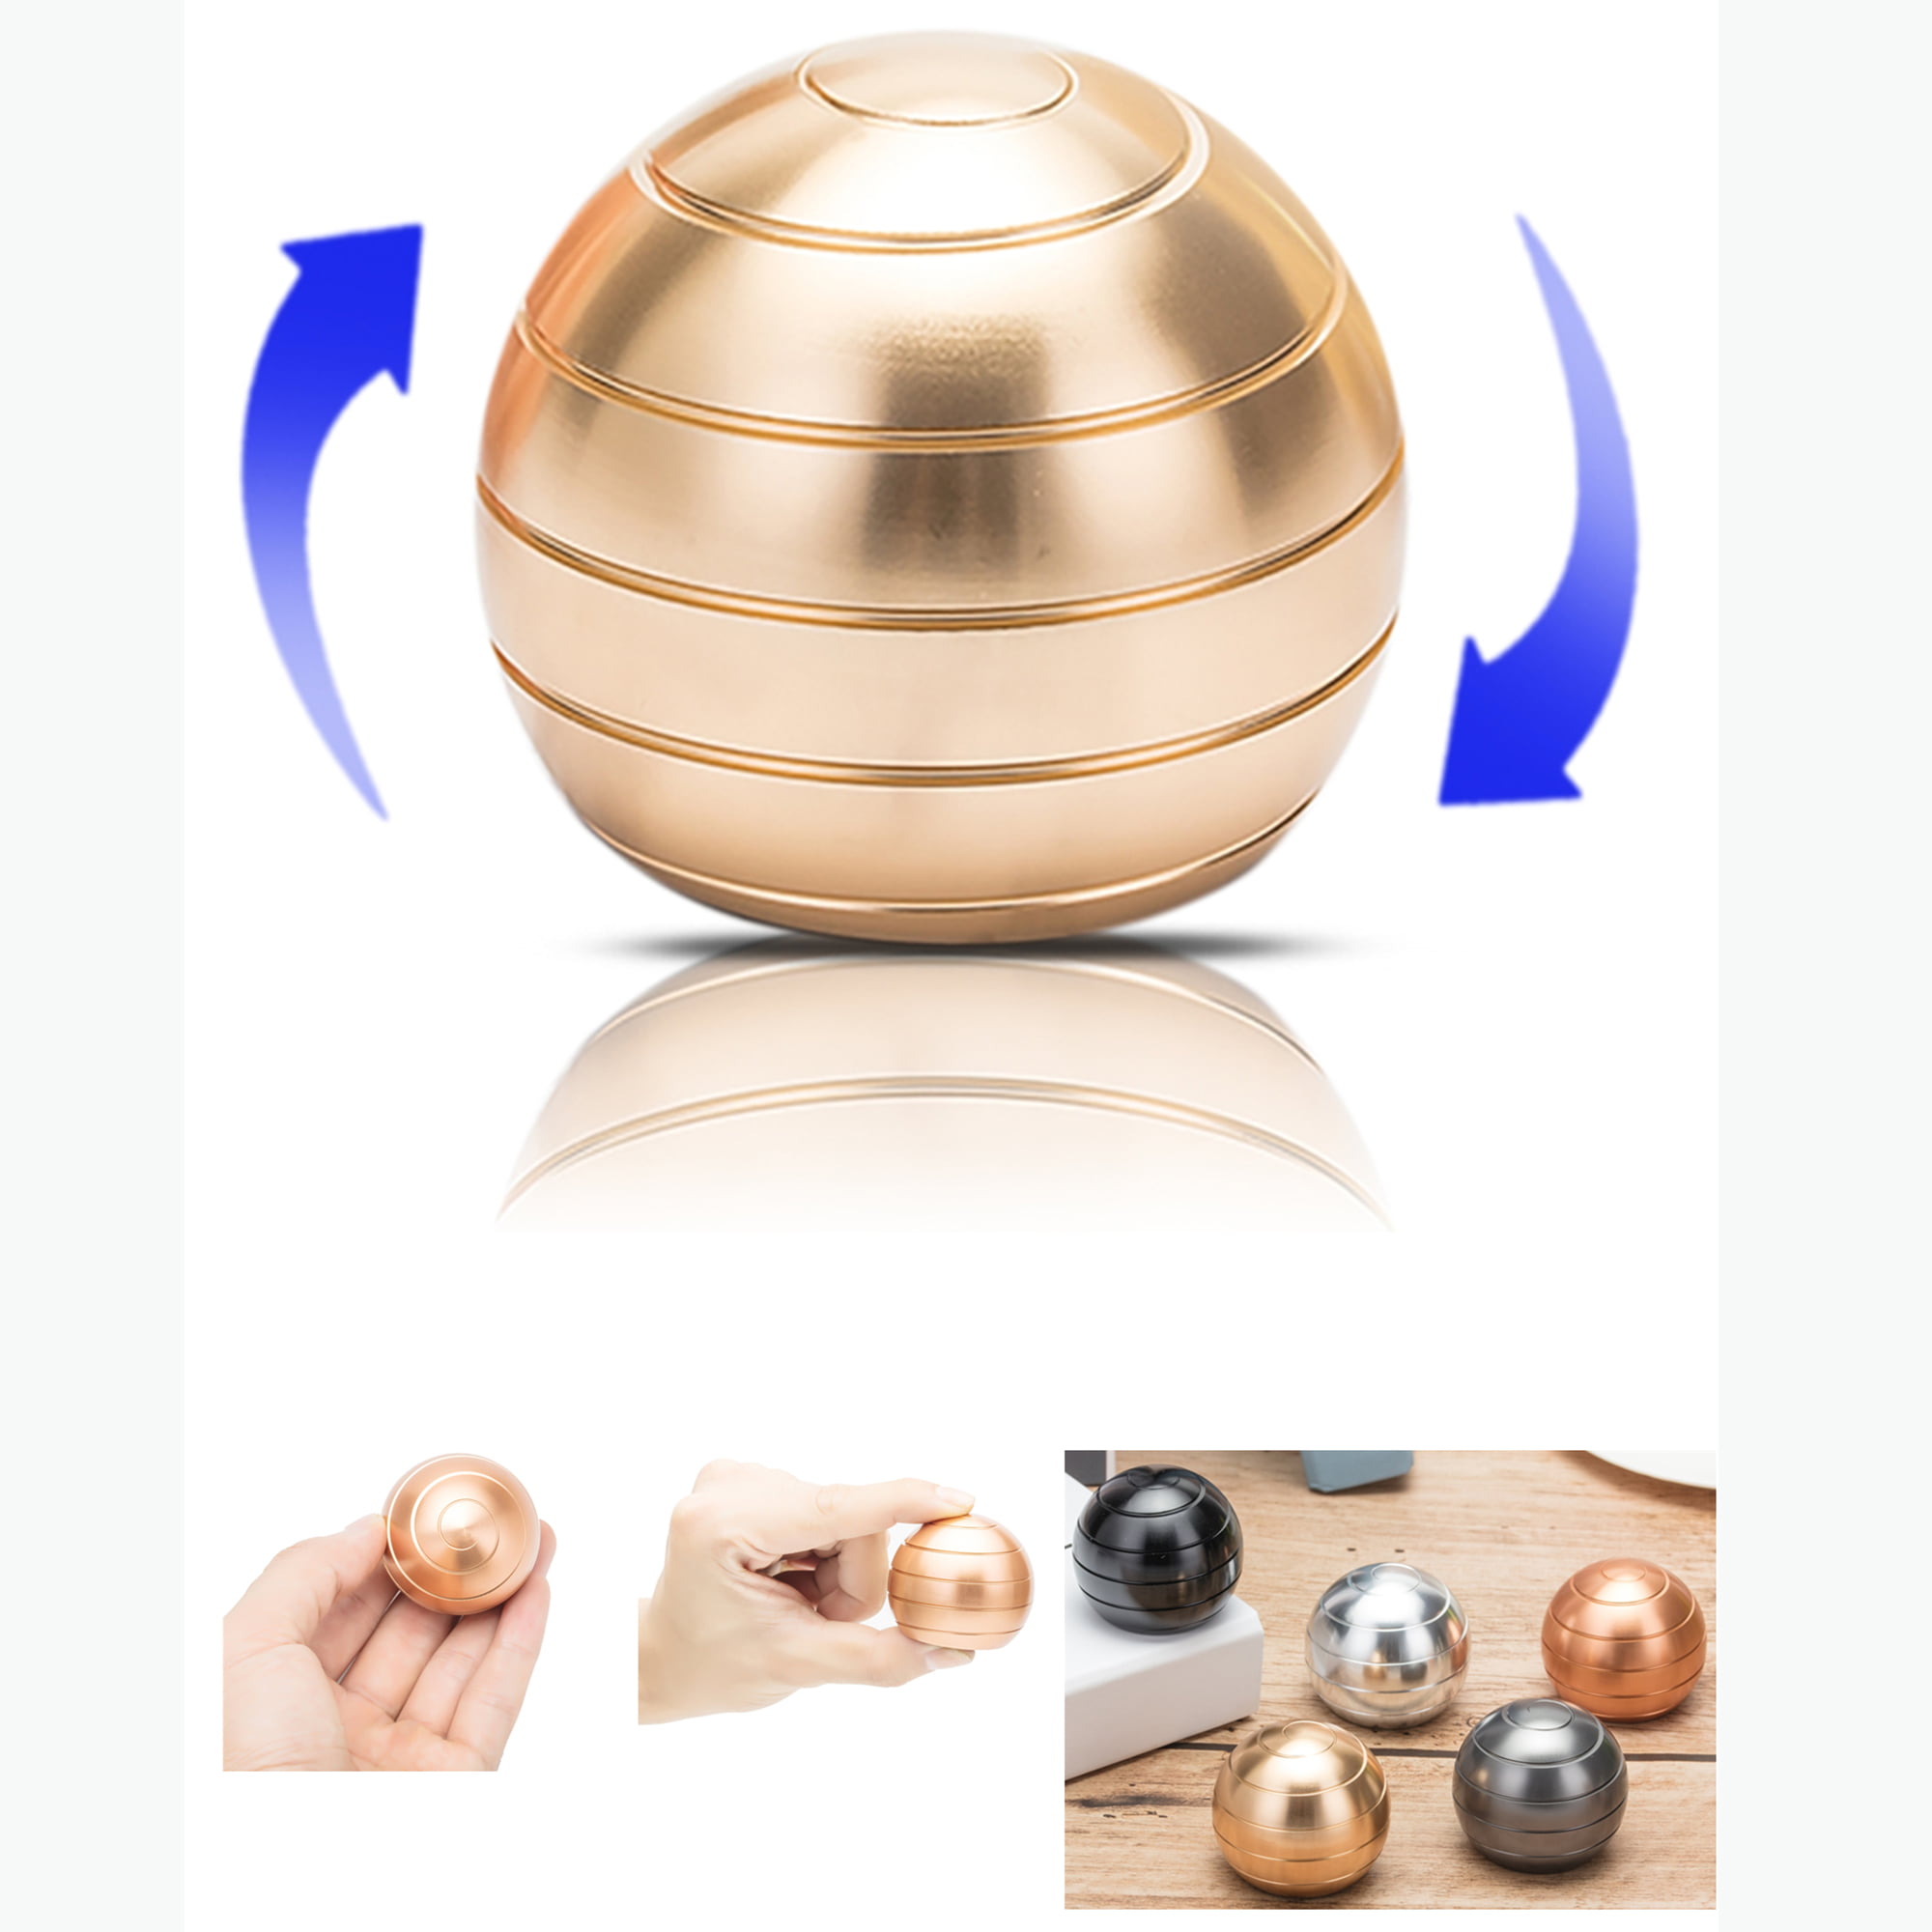 Relieve Anxiety Rotating Spherical Gyroscope Desktop Decompression Toy Desktop Decompression Toy Office Metal Spinner Ball Gyroscope With Optical Illusionfor Adults Stay Focused And Relax